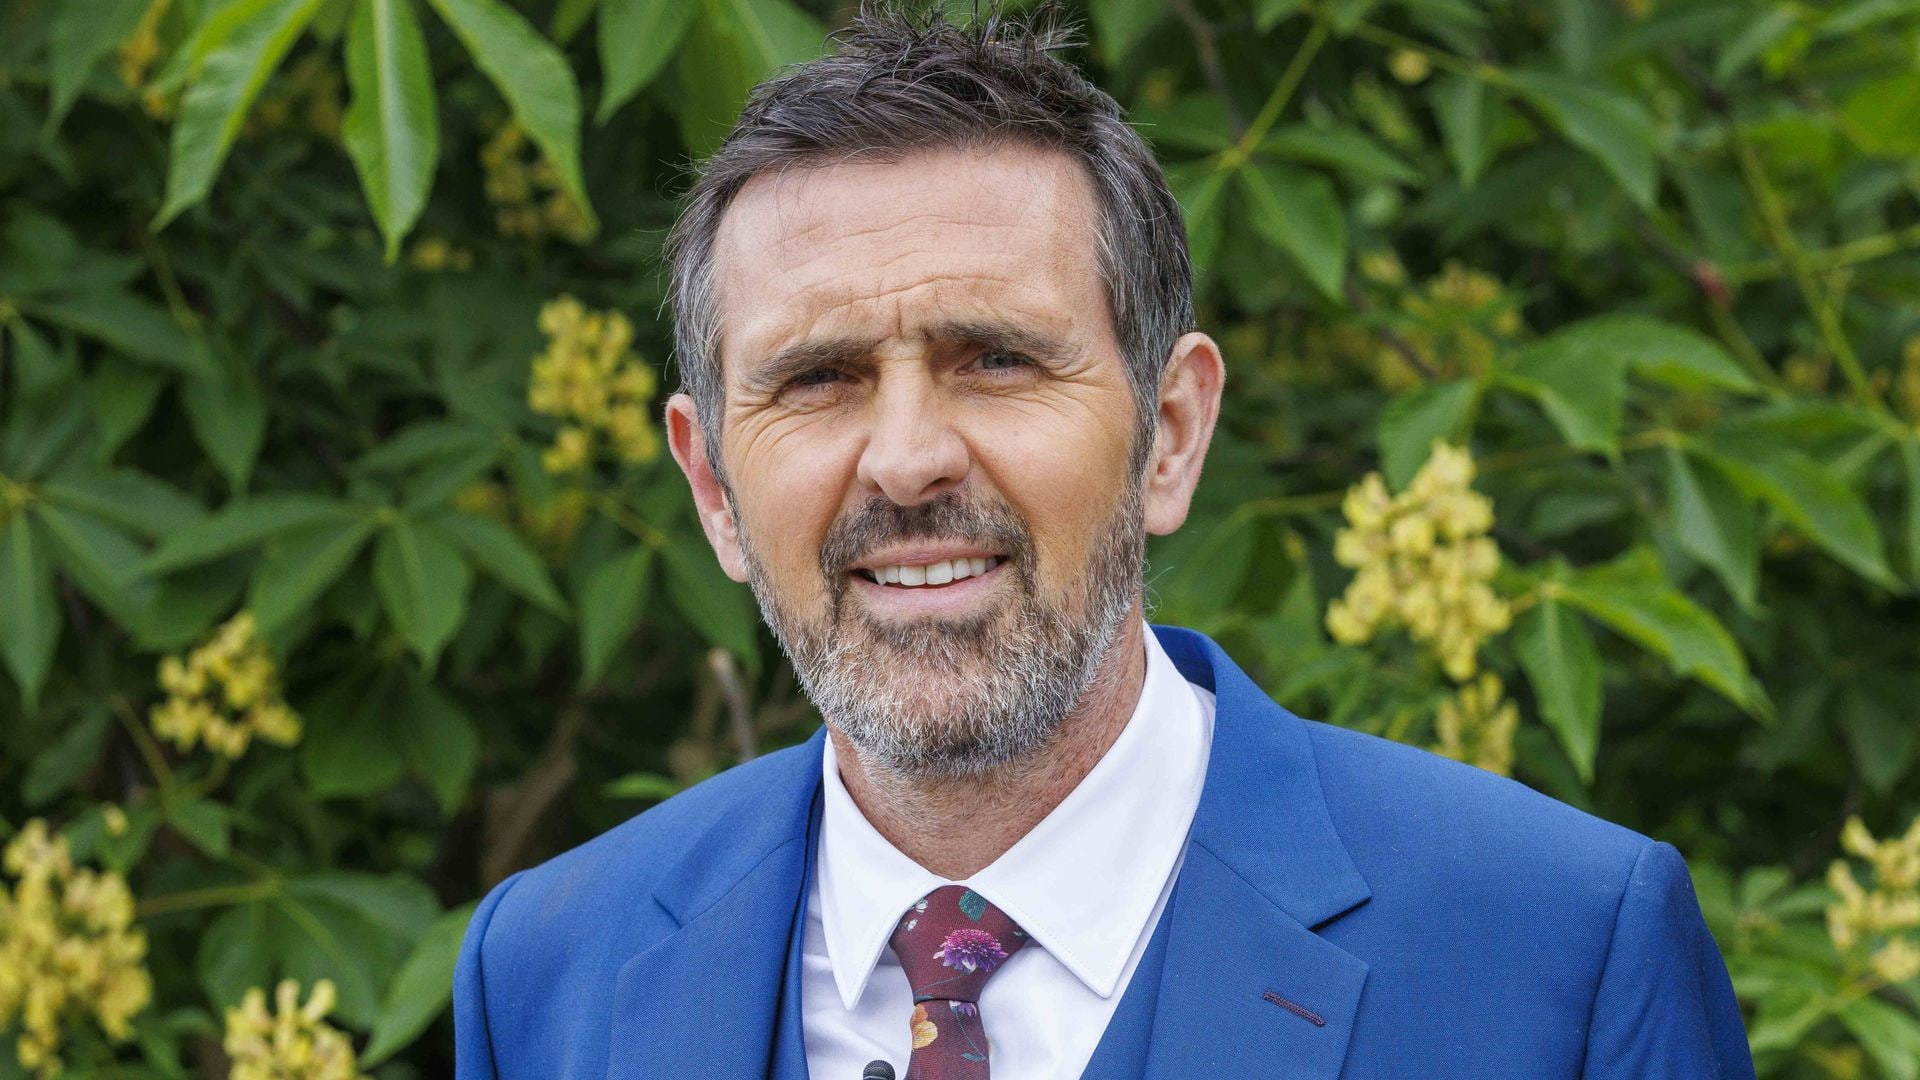 Adam Frost in a blue suit at the chelsea flower show 